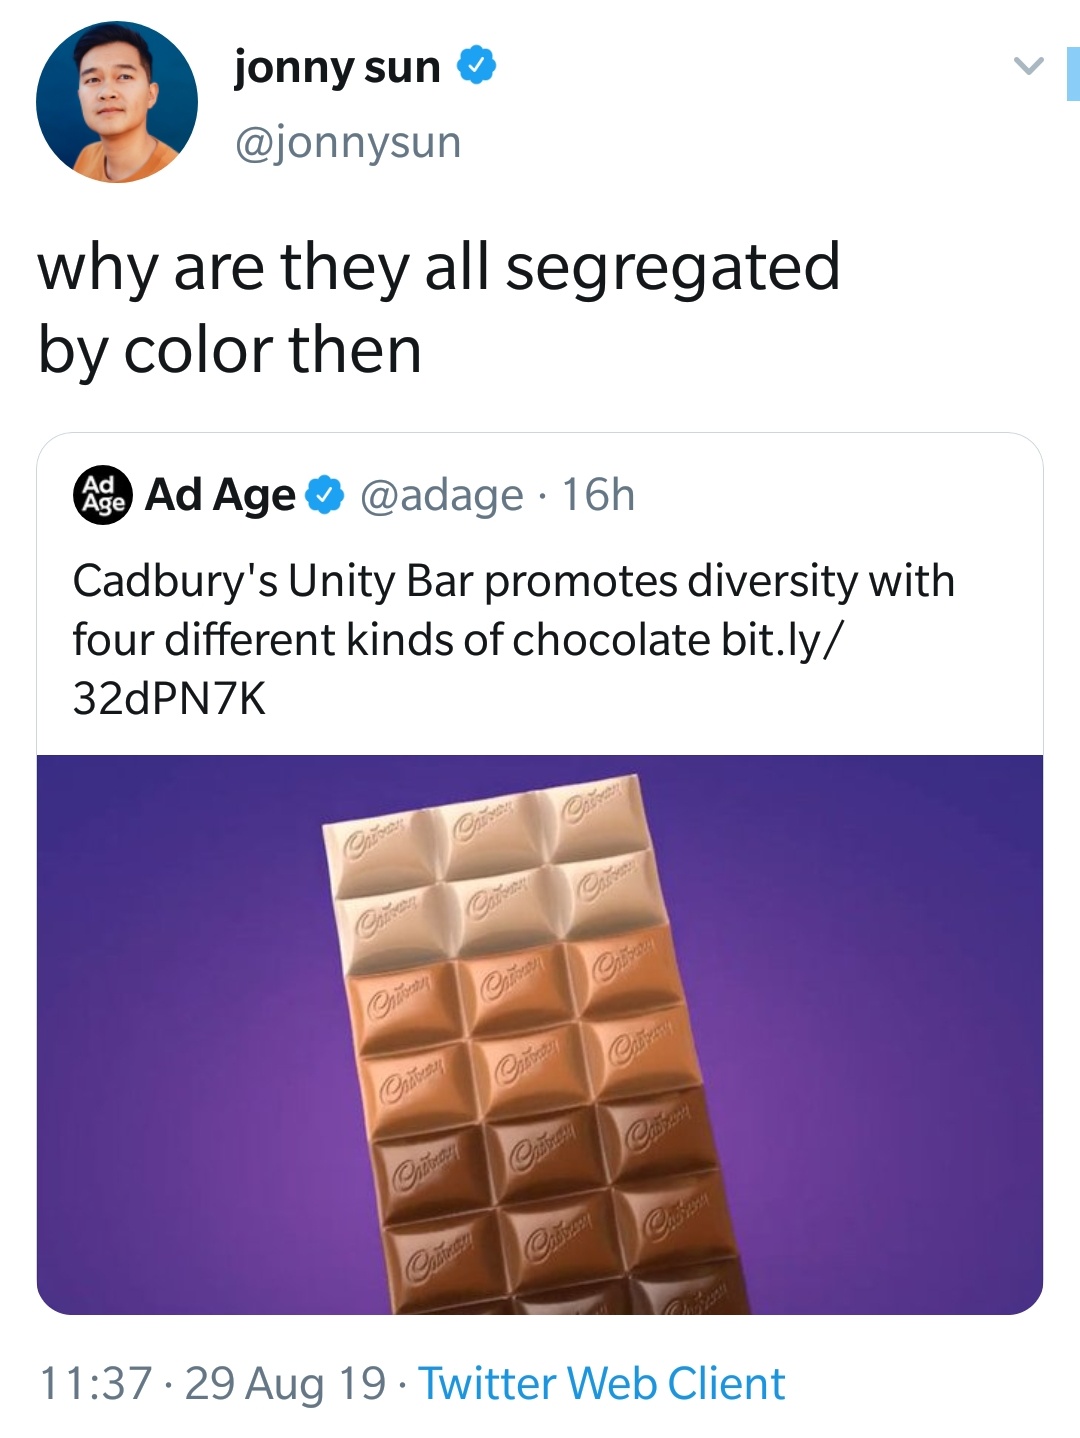 jonny sun why are they all segregated by color then Age Ad Age 16h Cadbury's Unity Bar promotes diversity with four different kinds of chocolate bit.ly 32dPNZK